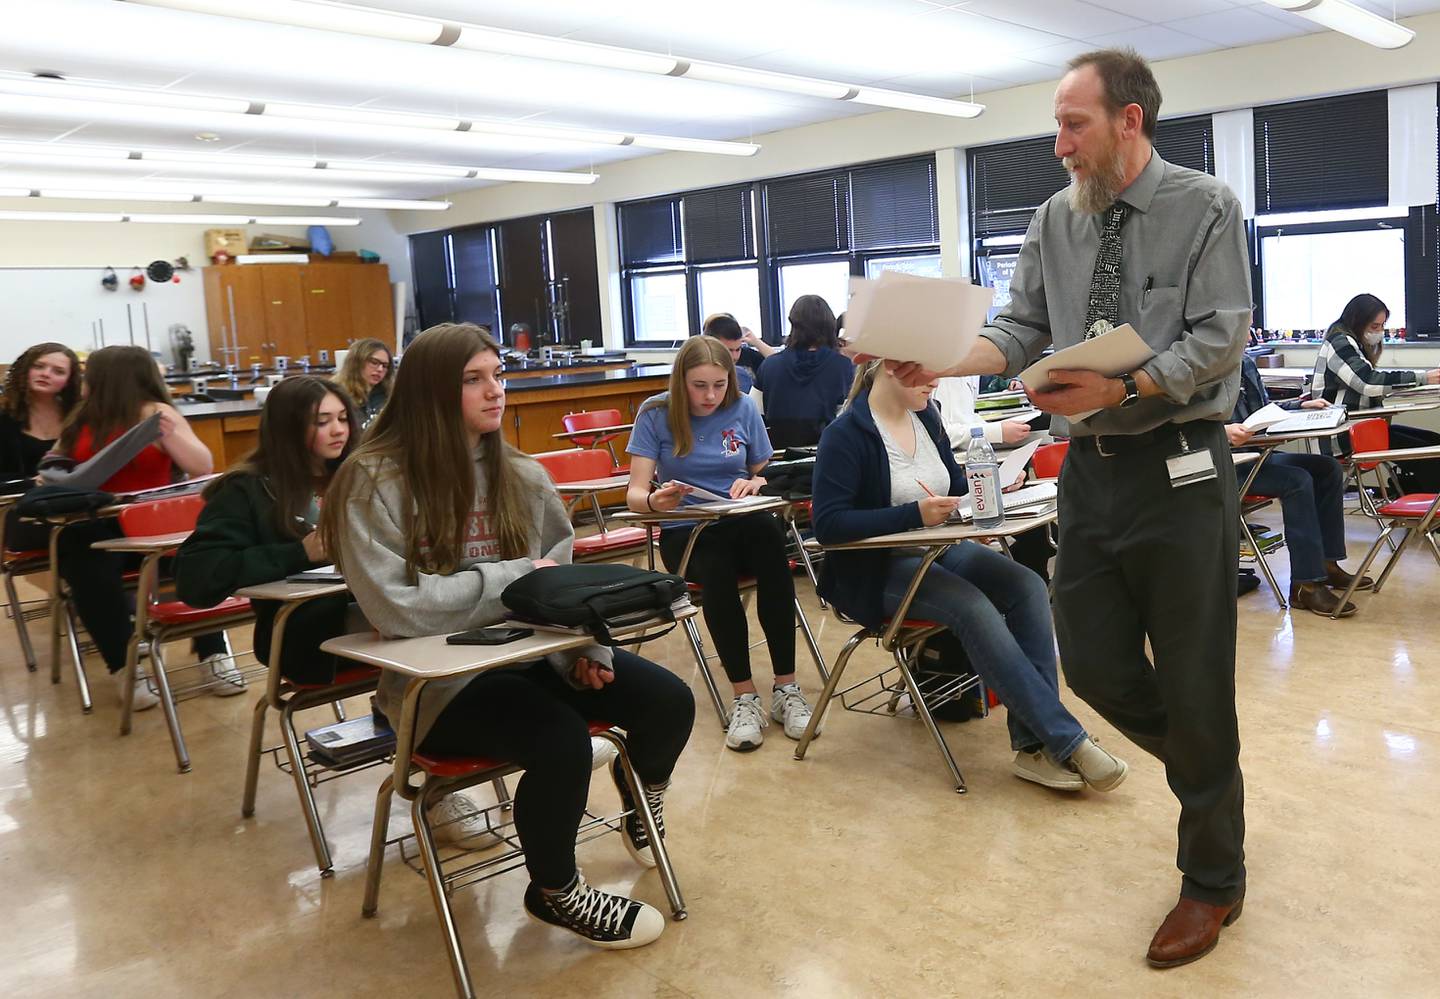 Bryan Leonard, chemistry teacher at Ottawa Township High School, hands out an assignment on electronic configurations on Tuesday March 29, 2022 in Ottawa. Leonard, has been teaching for 28 years and has seen changes in technology and how kids process information and he has tried to keep up with it.